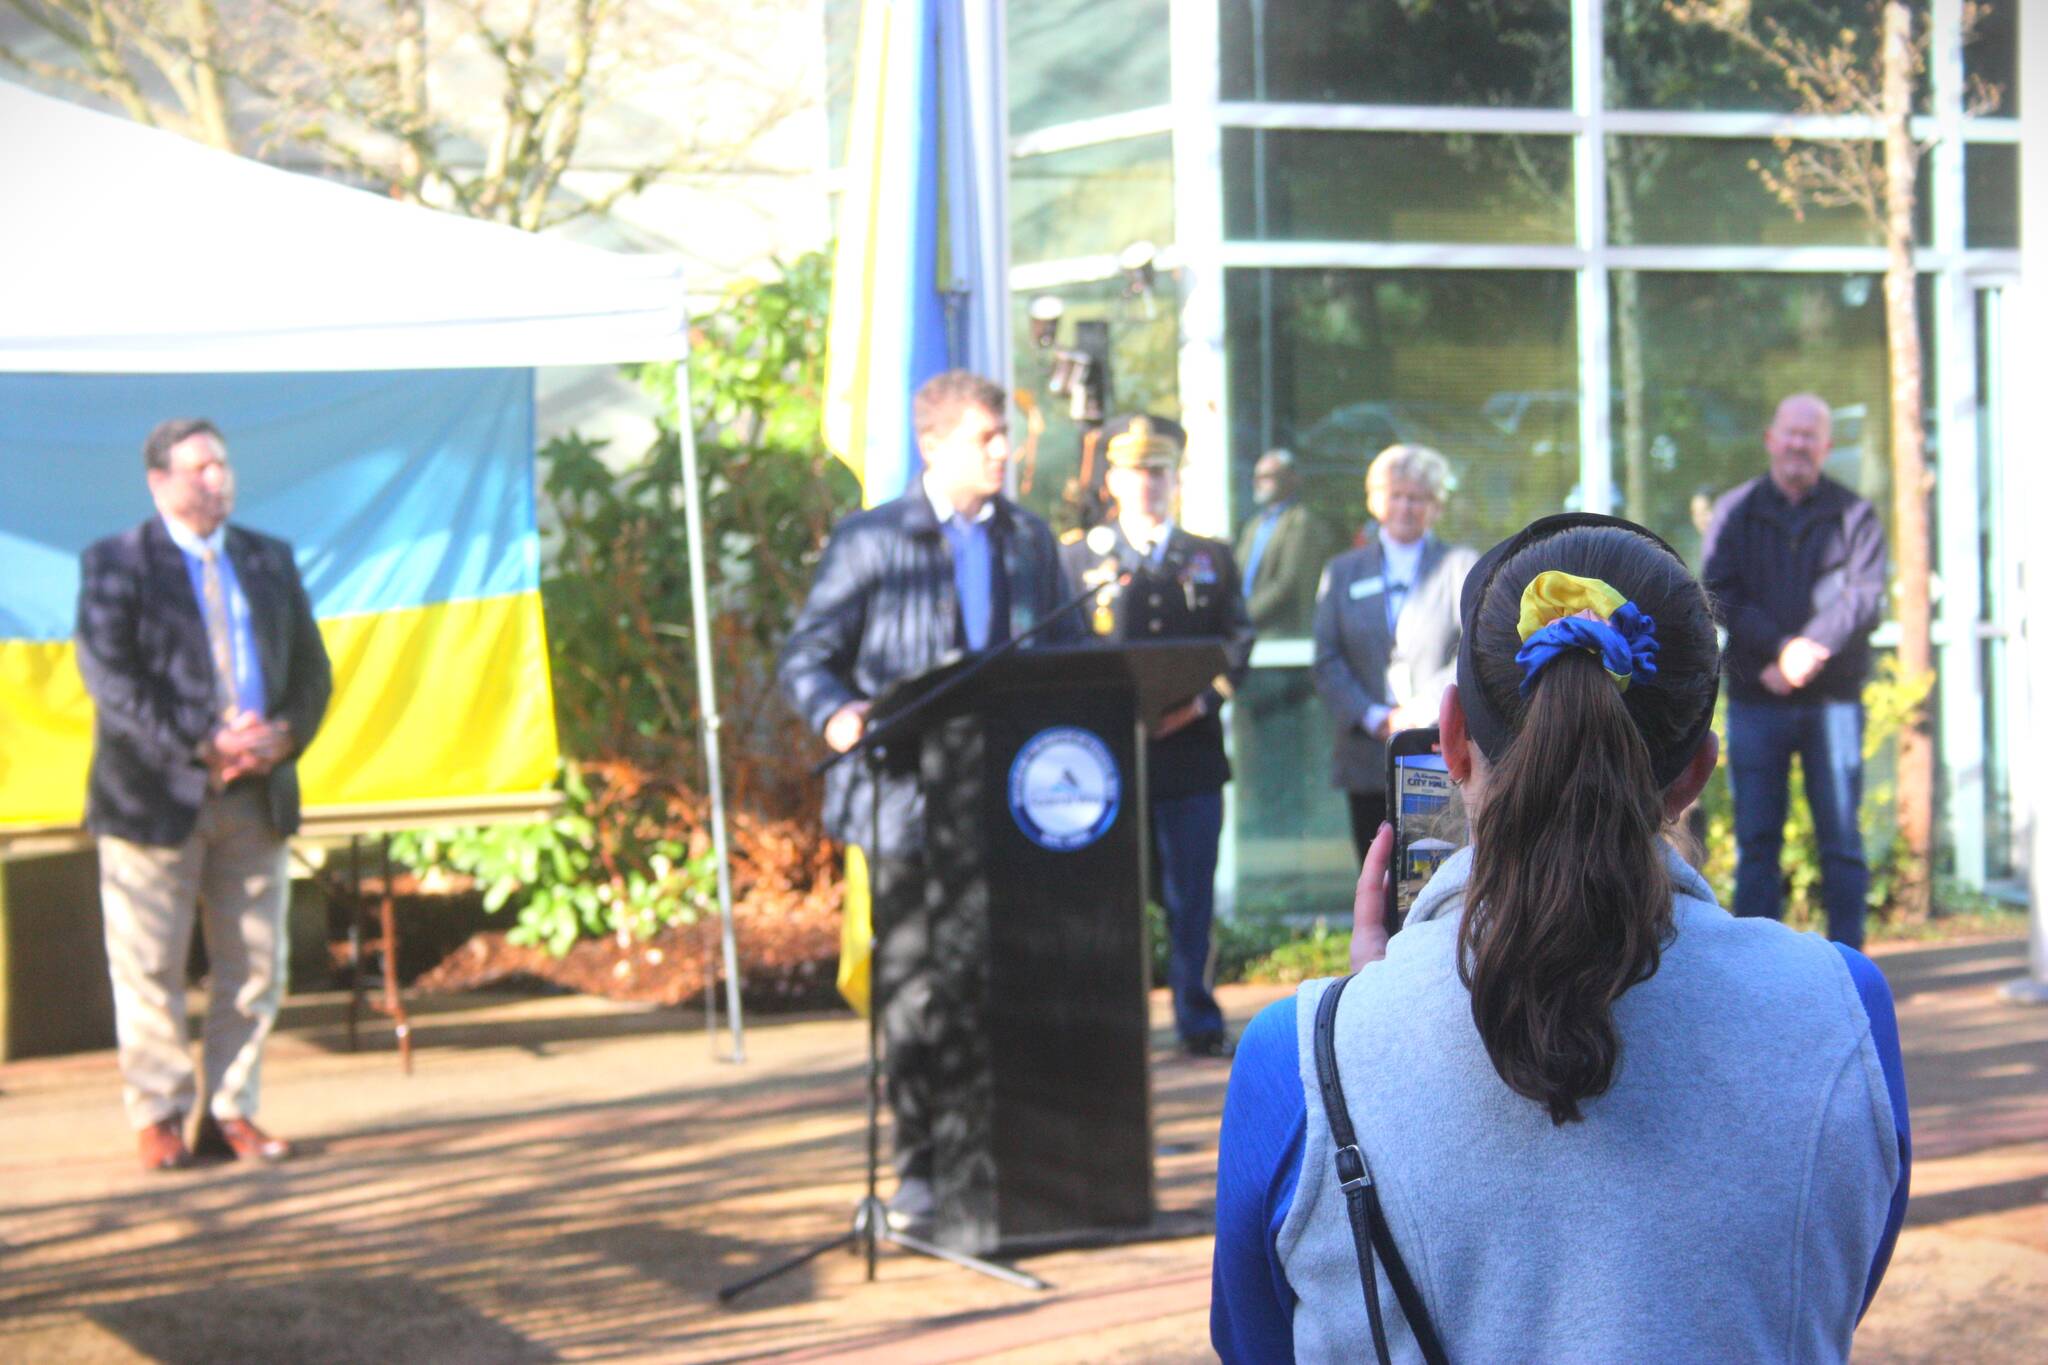 Raising of the Ukrainian flag at Federal Way City Hall on Friday, Feb. 23. (Photo by Keelin Everly-Lang / The Mirror)